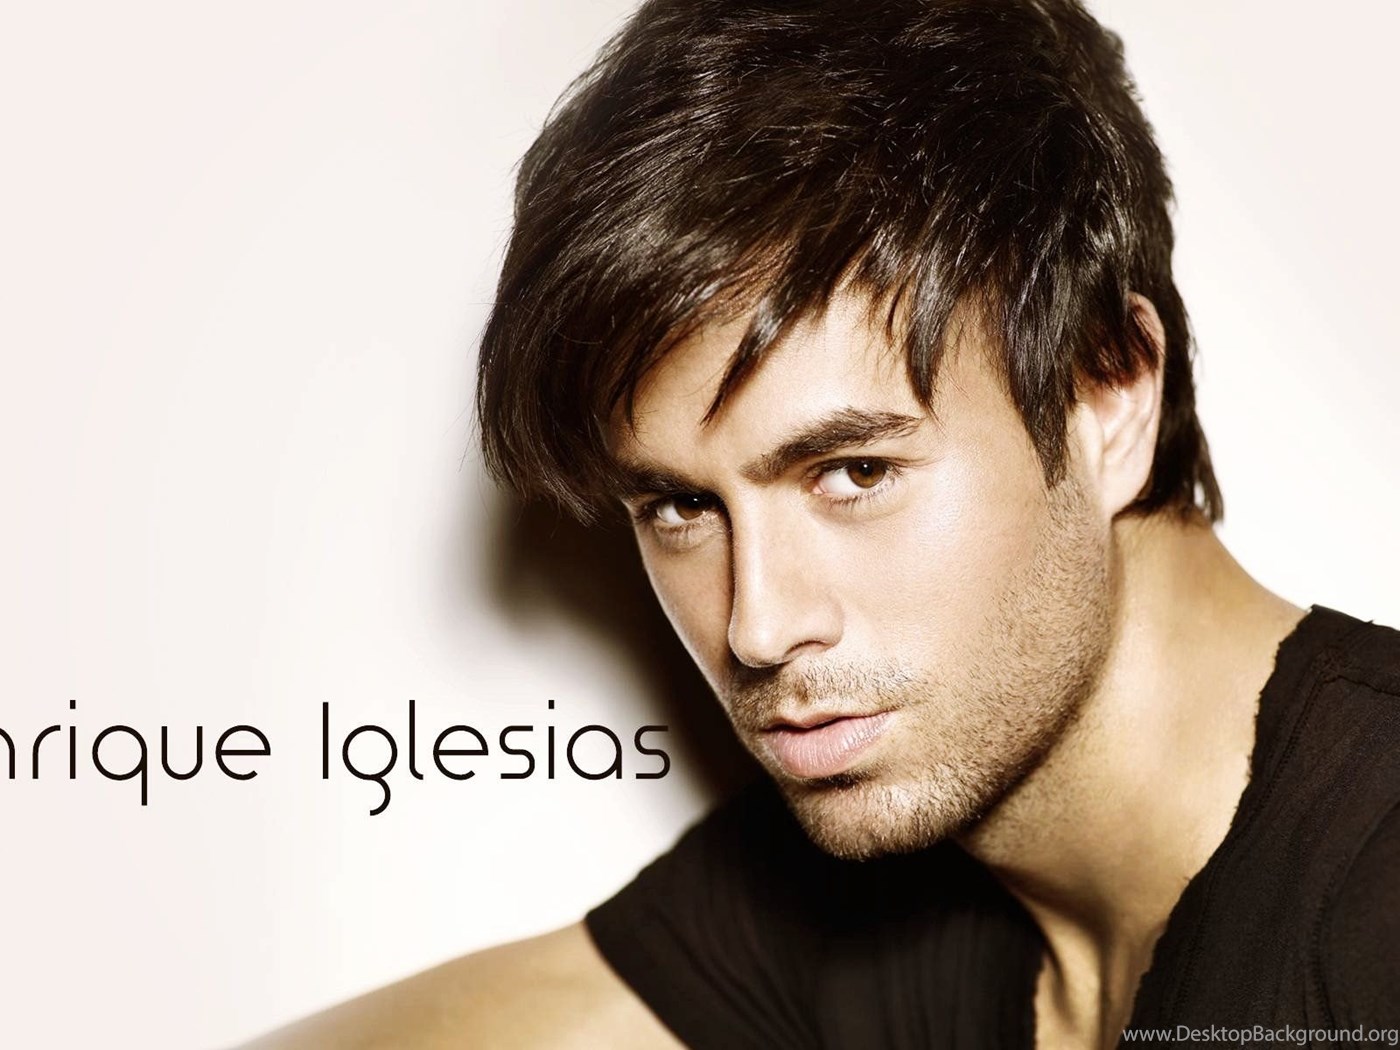 Download Download Free Enrique Iglesias Hairstyle Hdwallpapers Fullscreen S...